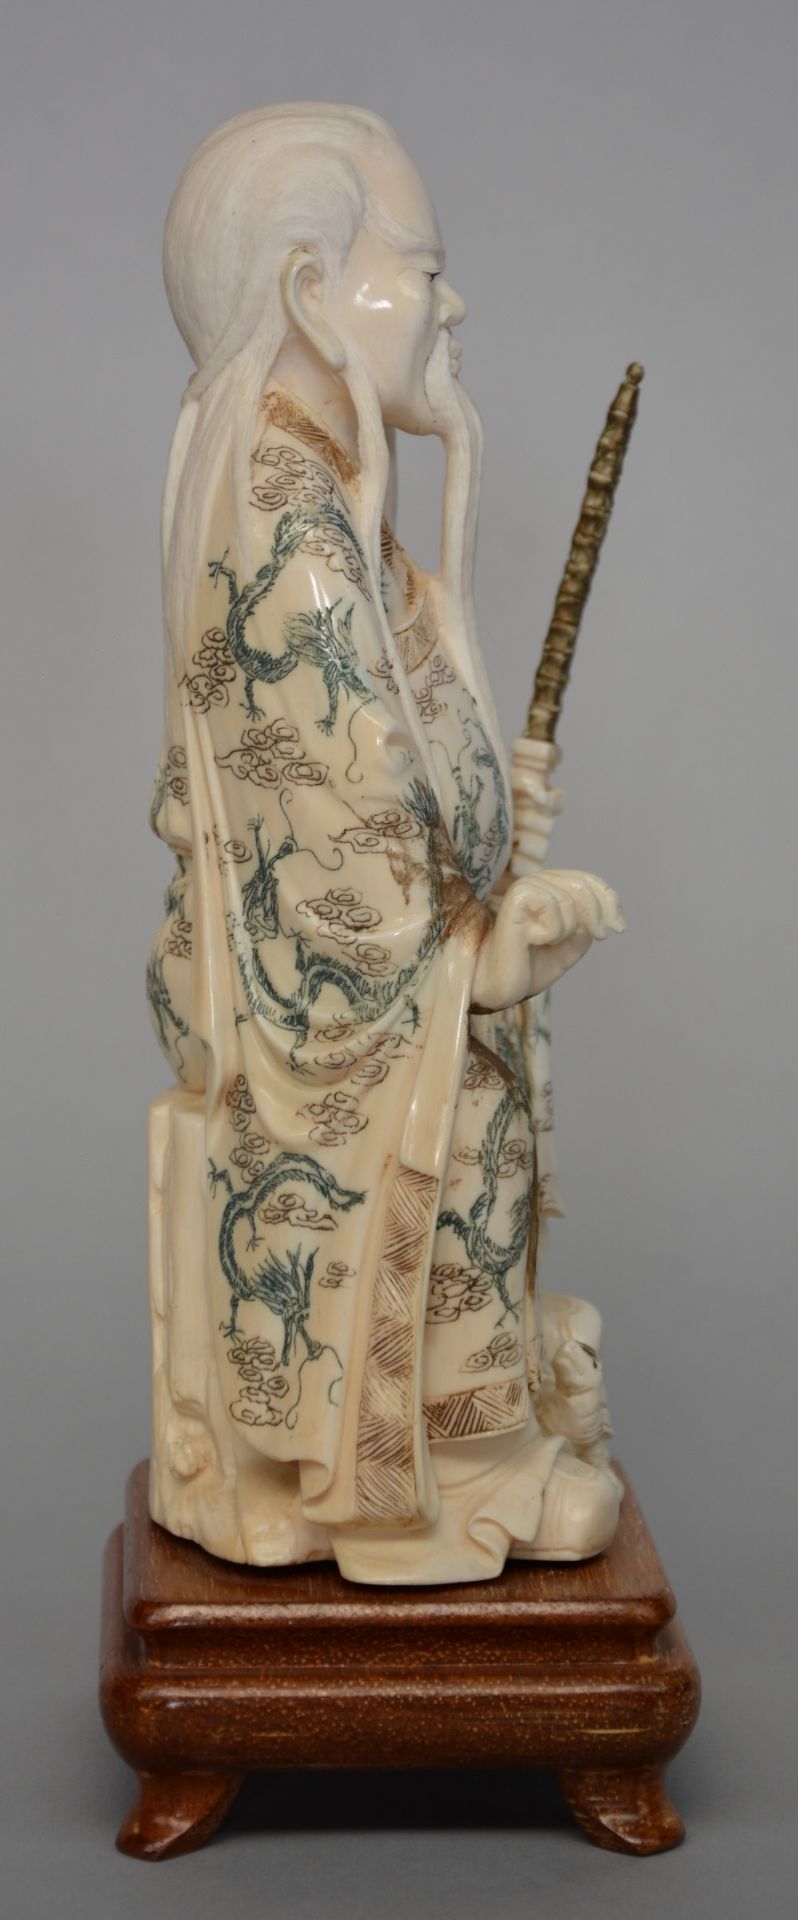 A Chinese ivory sculpture of a deity, on wooden base, scrimshaw decorated, first half 20thC, H 25 cm - Image 4 of 4